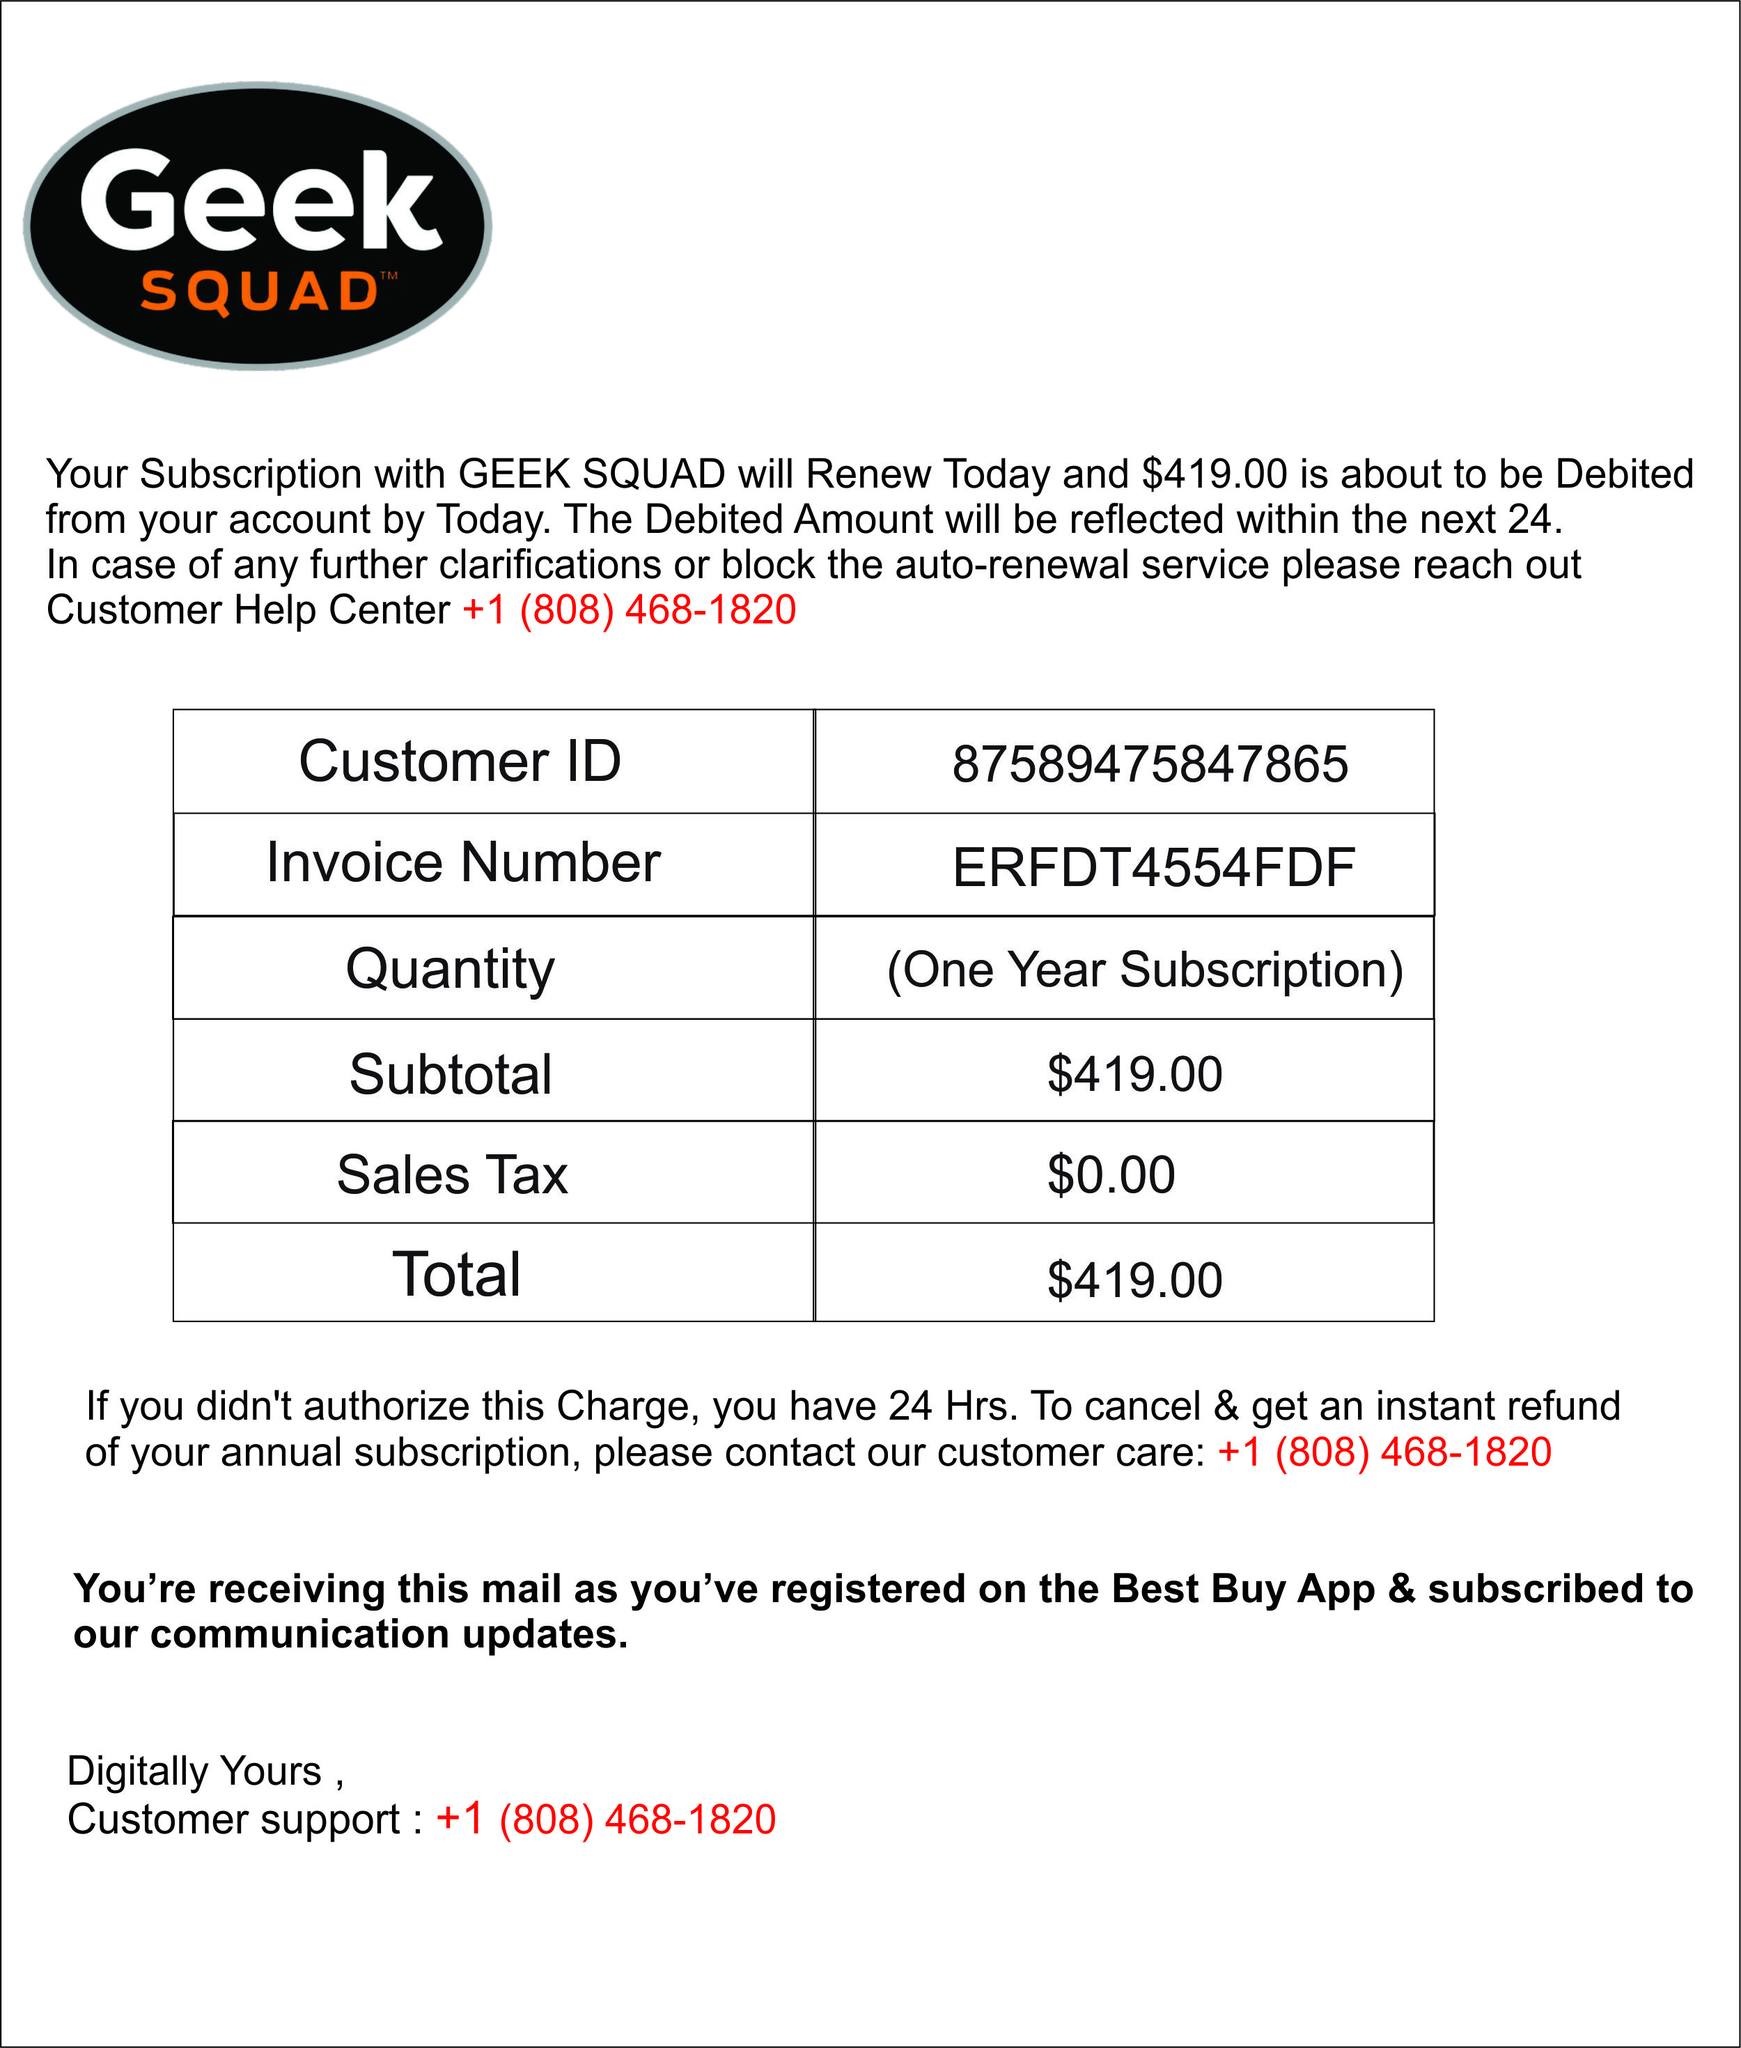 Geek Squad Billing Scam Email Renewal Subscription Invoice